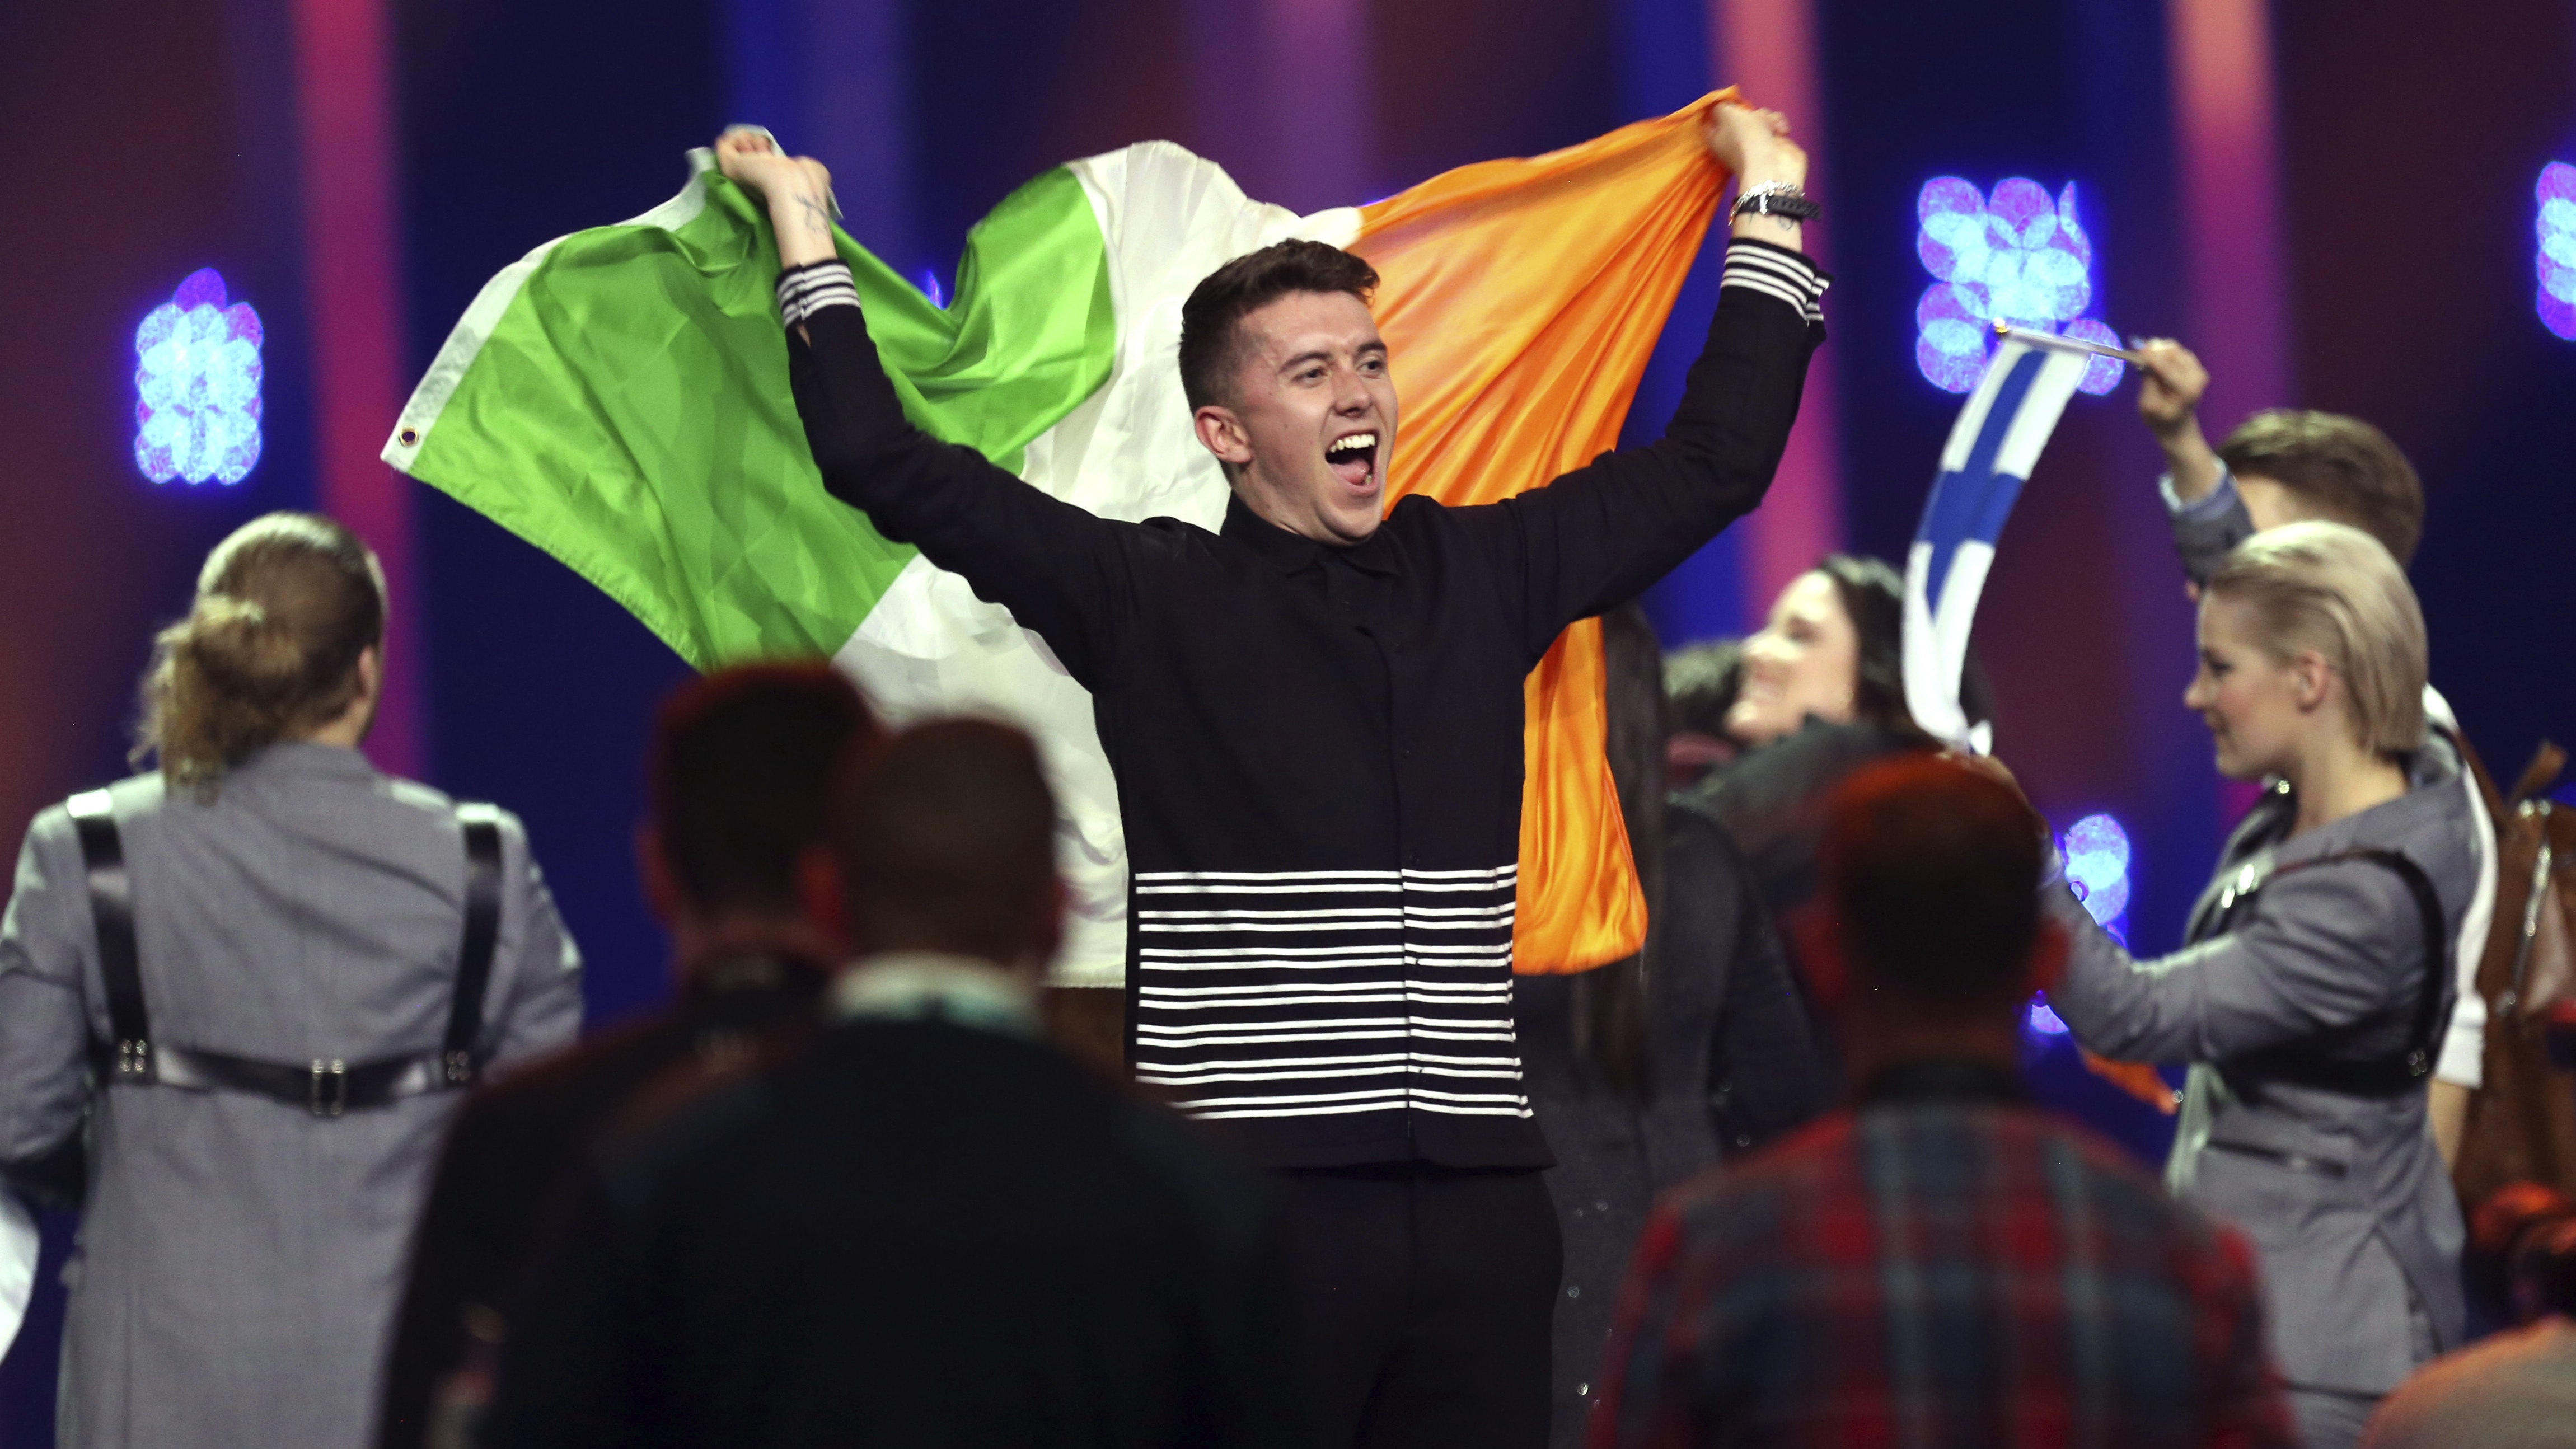 Ireland wins a place at the Eurovision grand final after wowing with